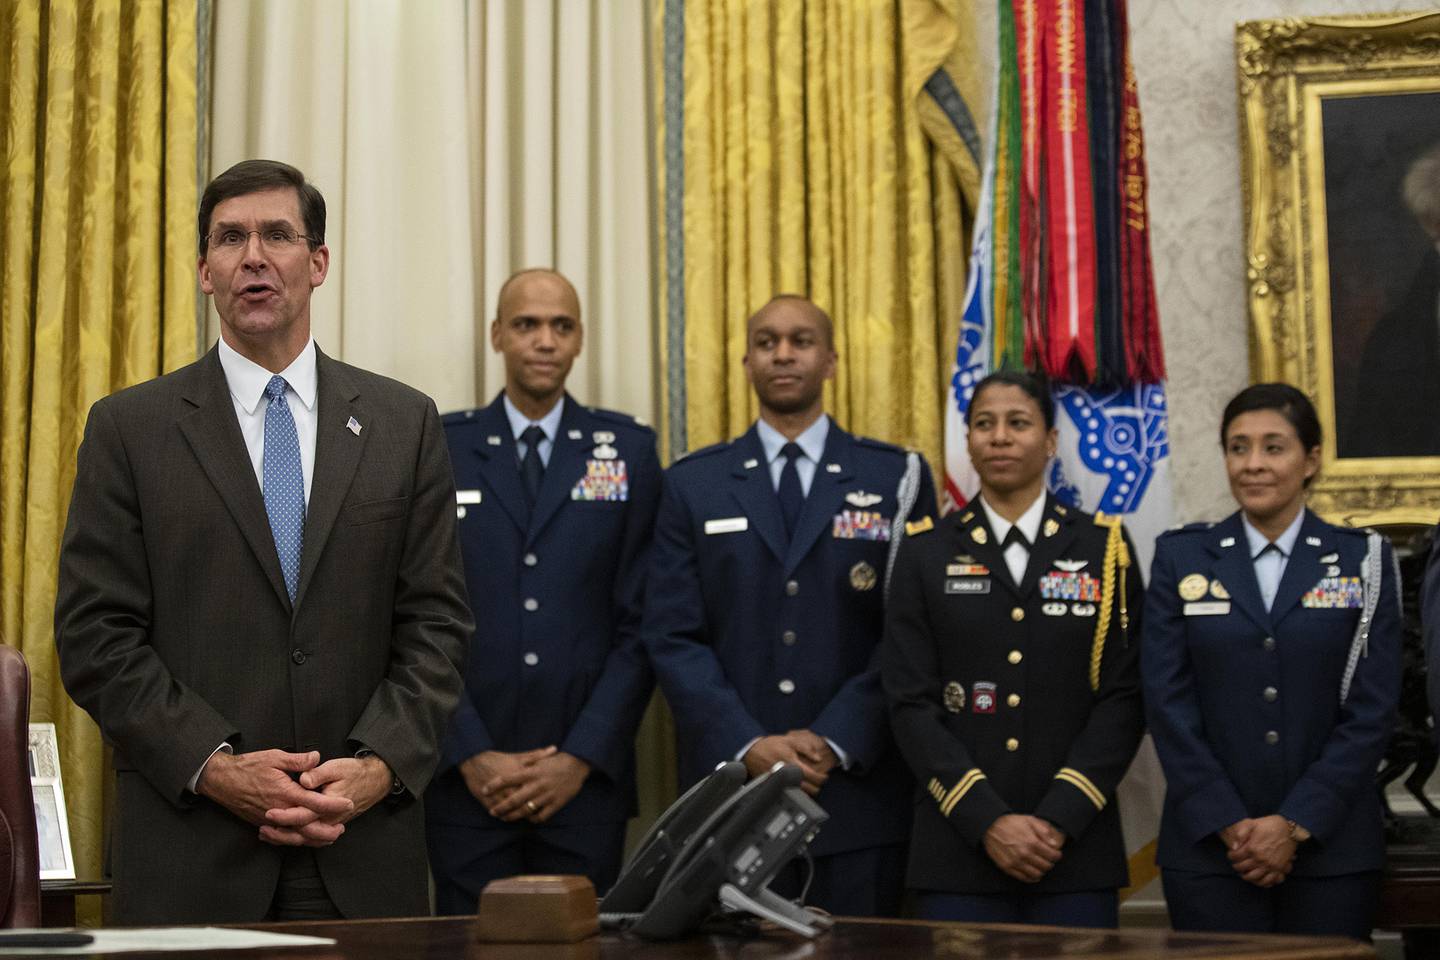 Secretary of Defense Mark Esper, left, speaks after a ceremony to swear in Gen. Charles Q. Brown Jr. as chief of staff of the Air Force in the Oval Office of the White House, Tuesday, Aug. 4, 2020, in Washington.